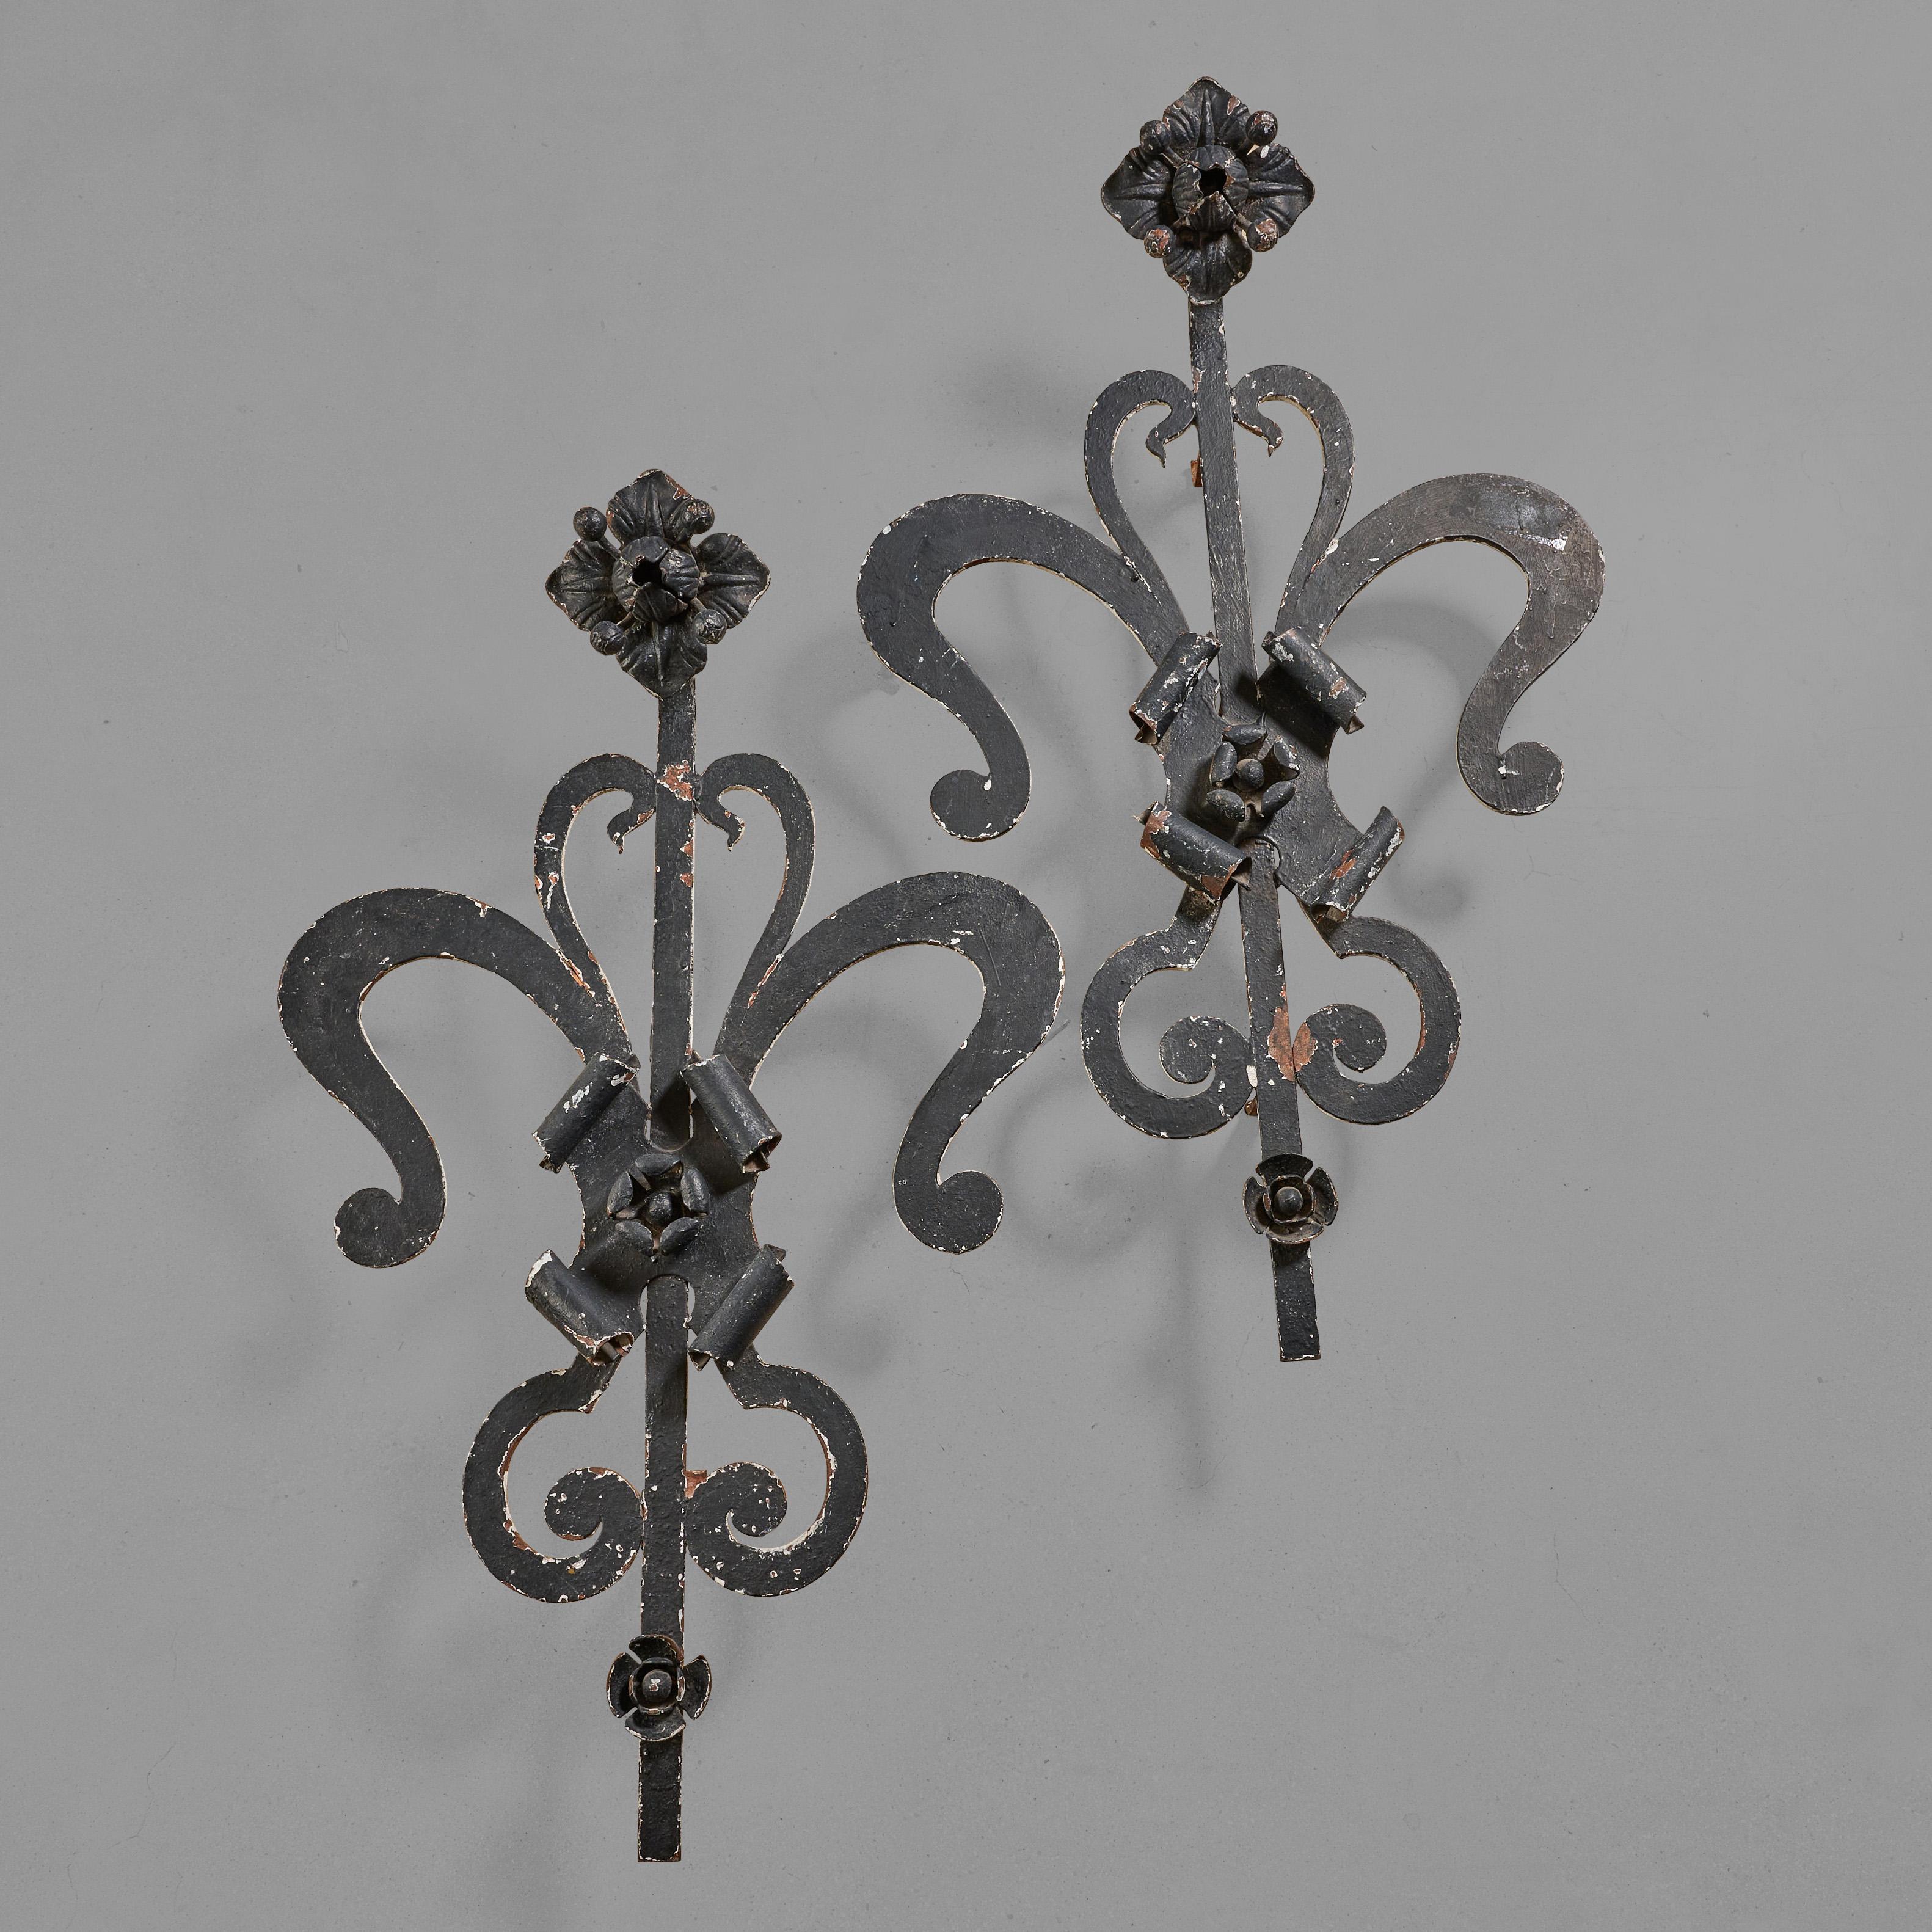 Pair of Wrought Iron Decorative Facade Ornaments In Good Condition For Sale In Chicago, IL